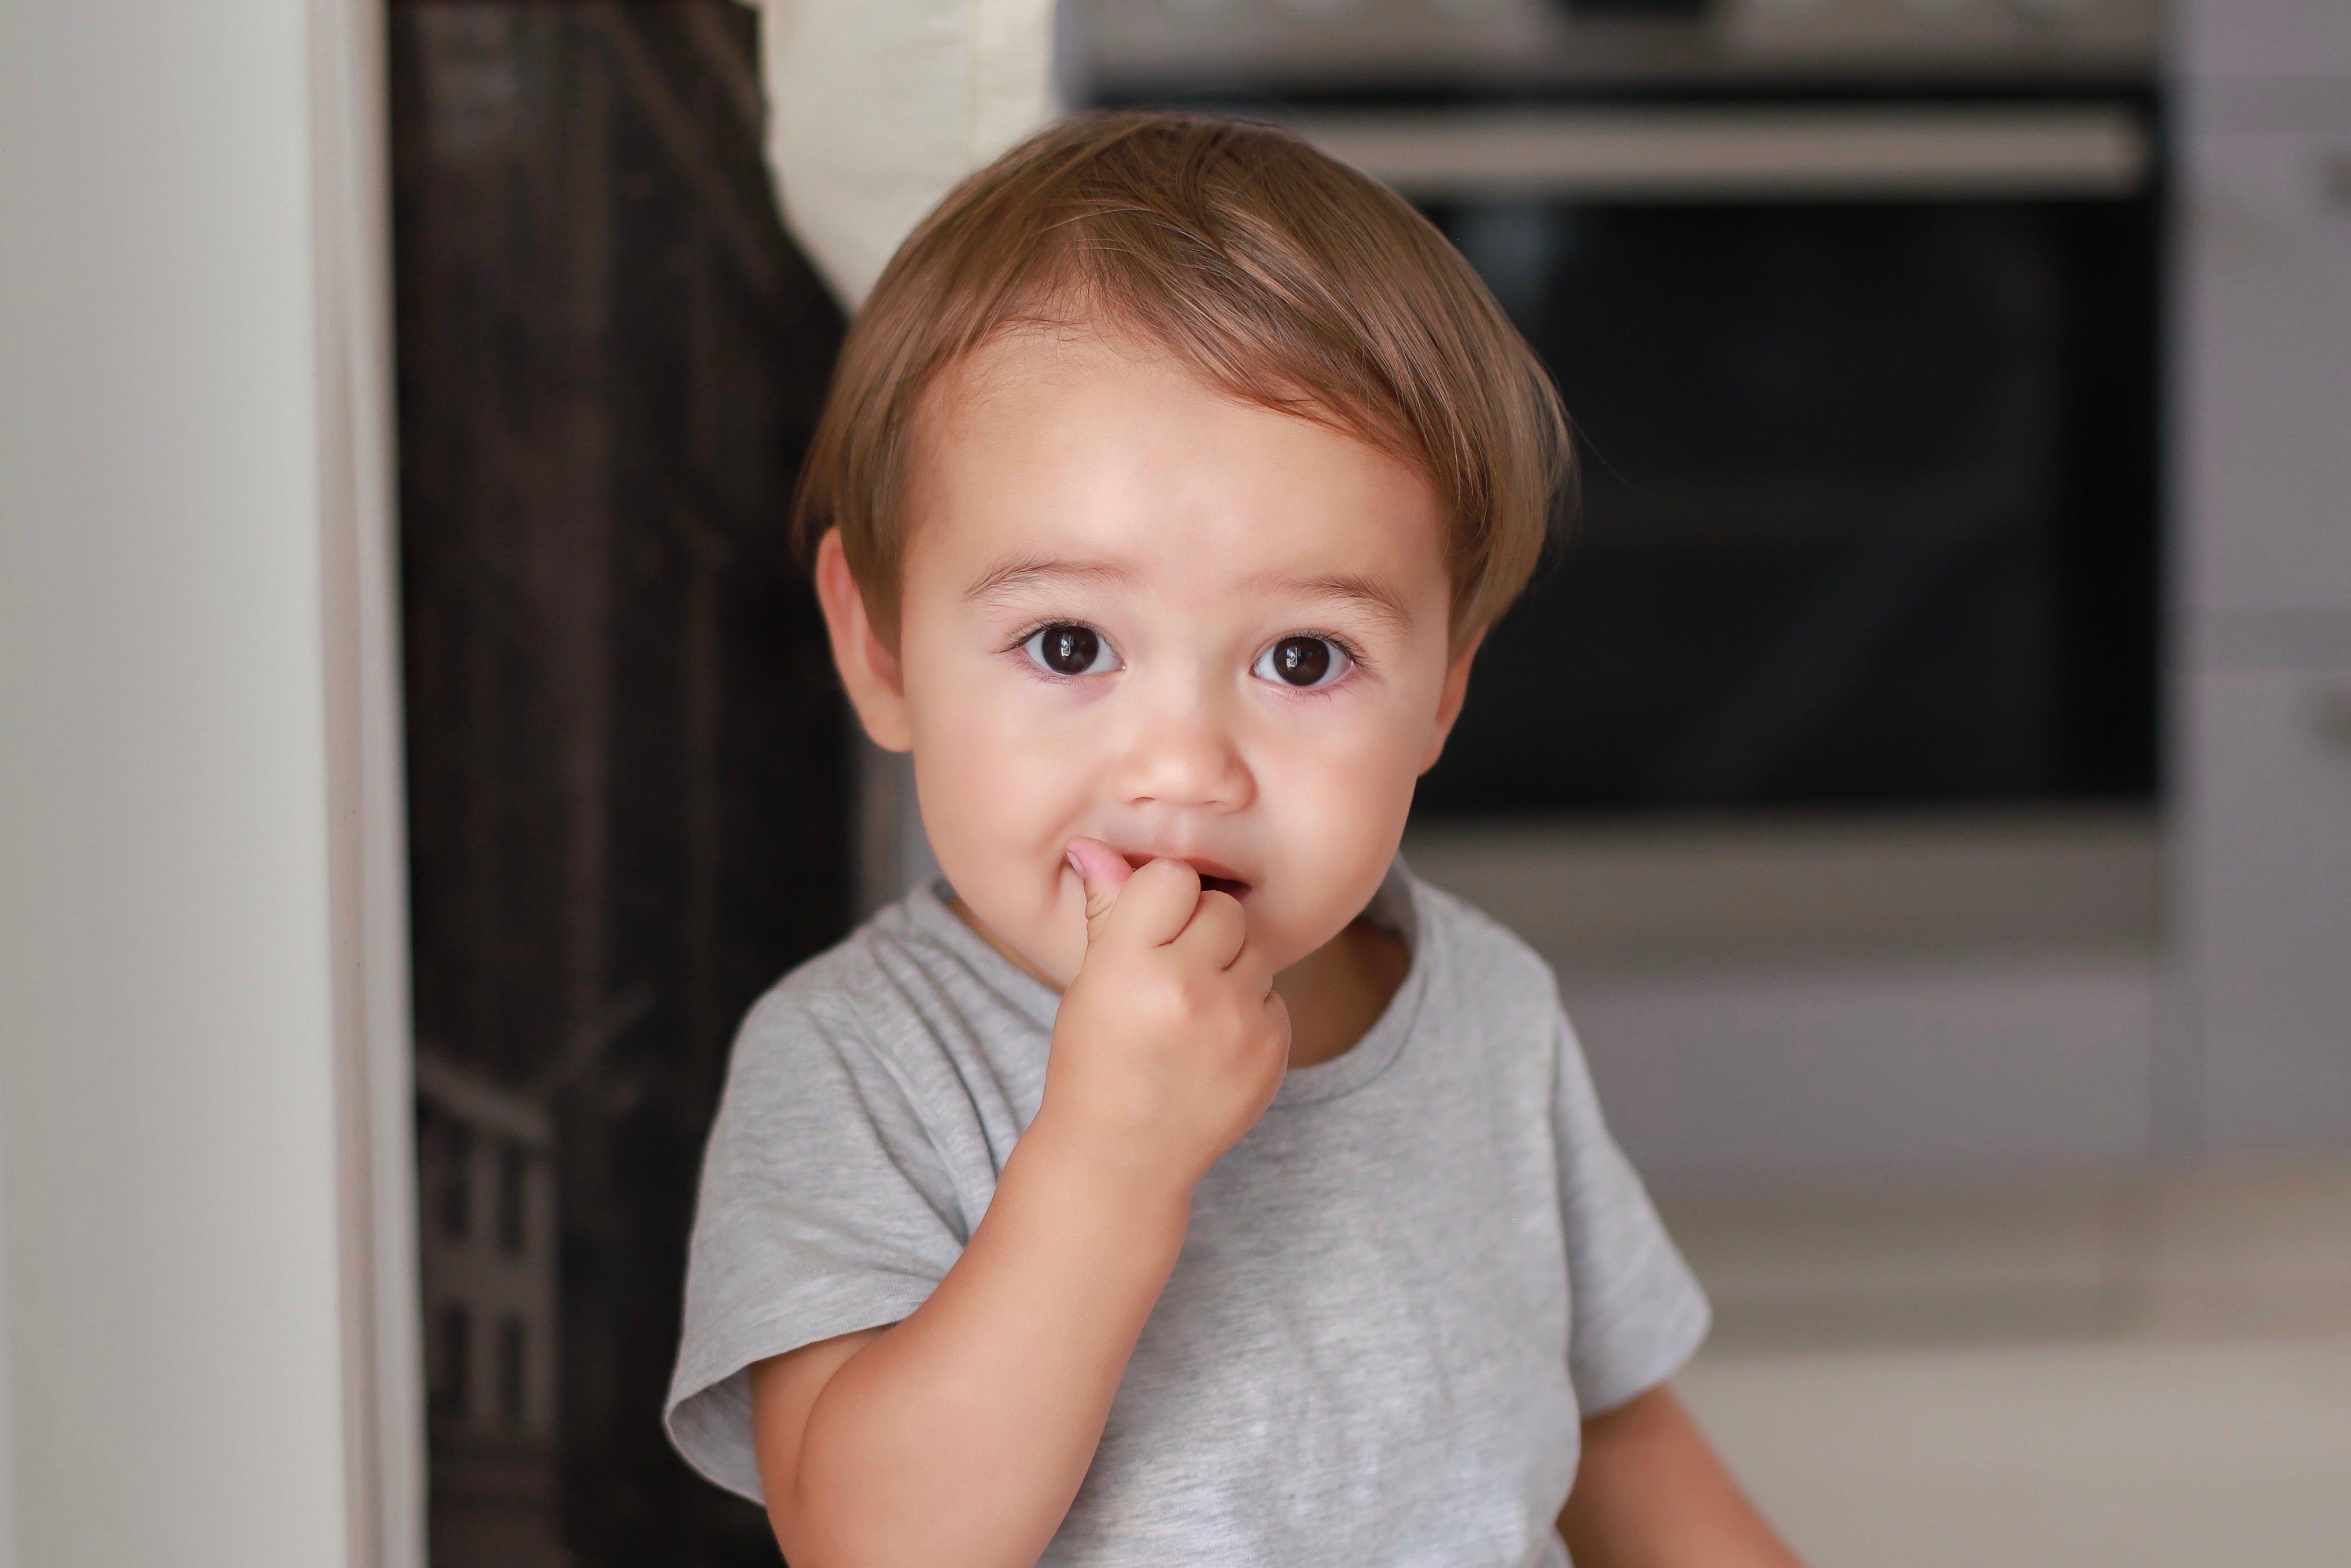 Headshot of baby boy with finger in his mouth eating snack at home. | Source: Shutterstock